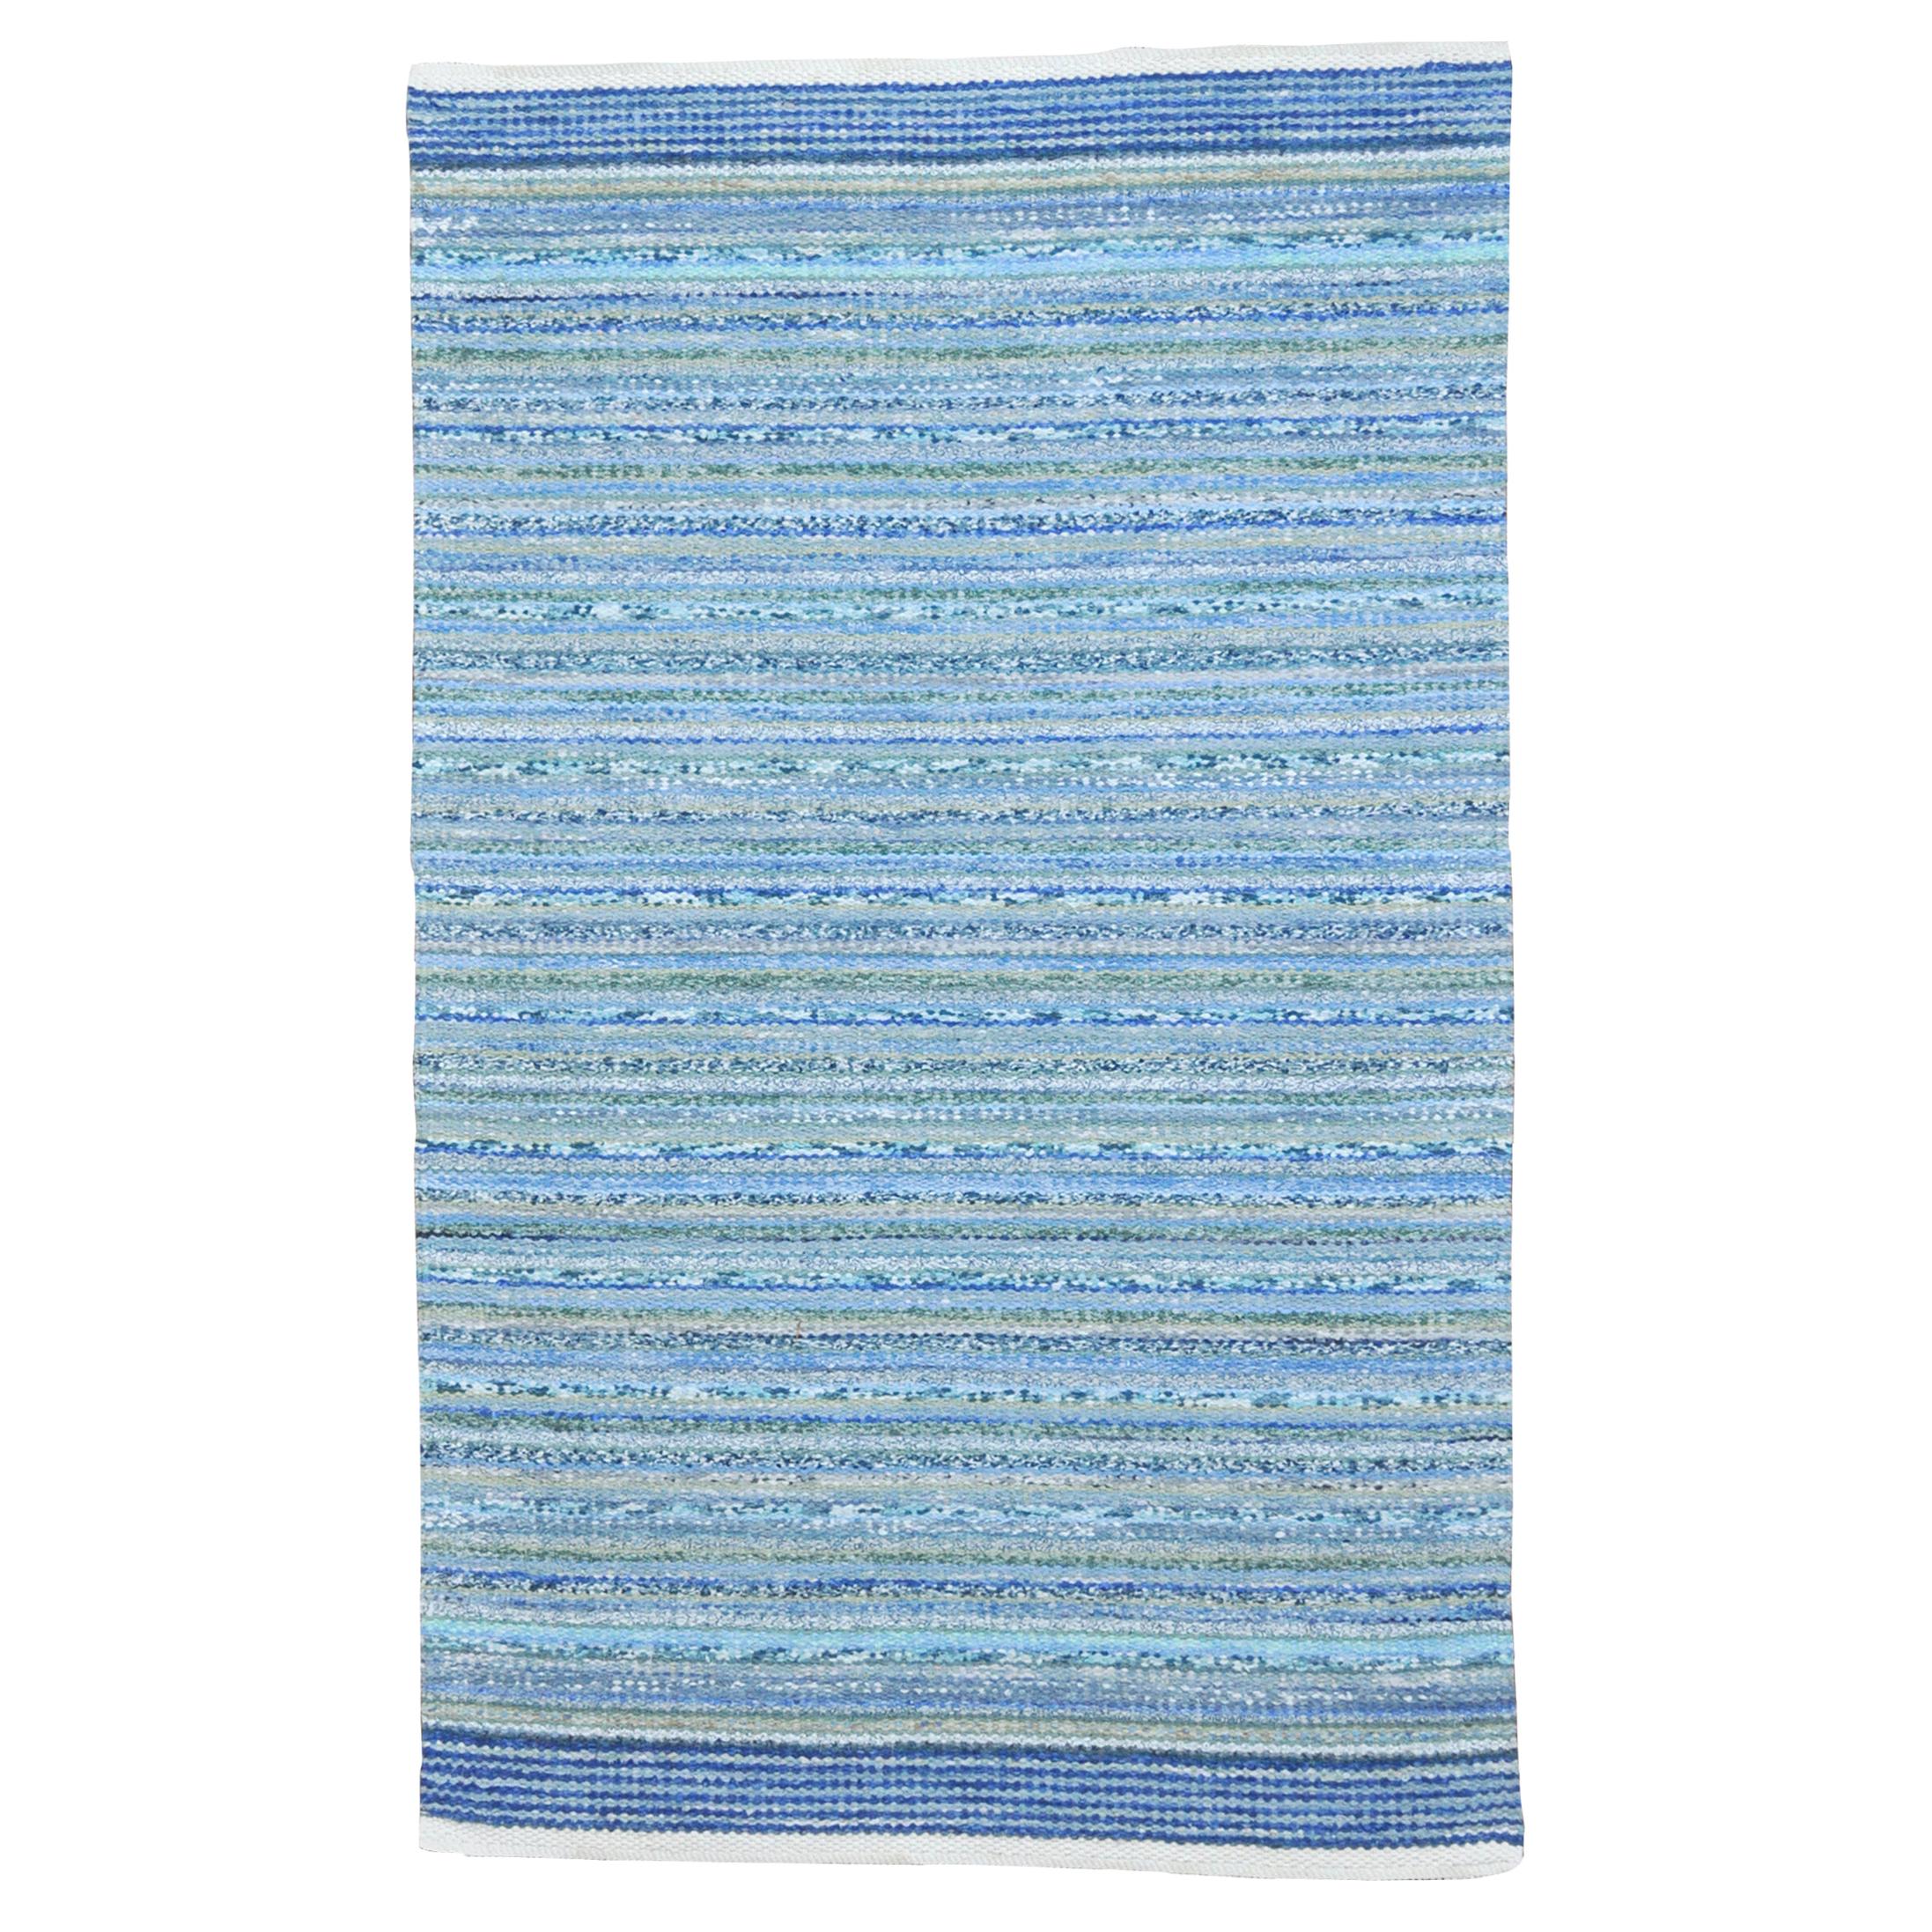 Contemporary Unique Handwoven Danish Rug in Recycled Materials